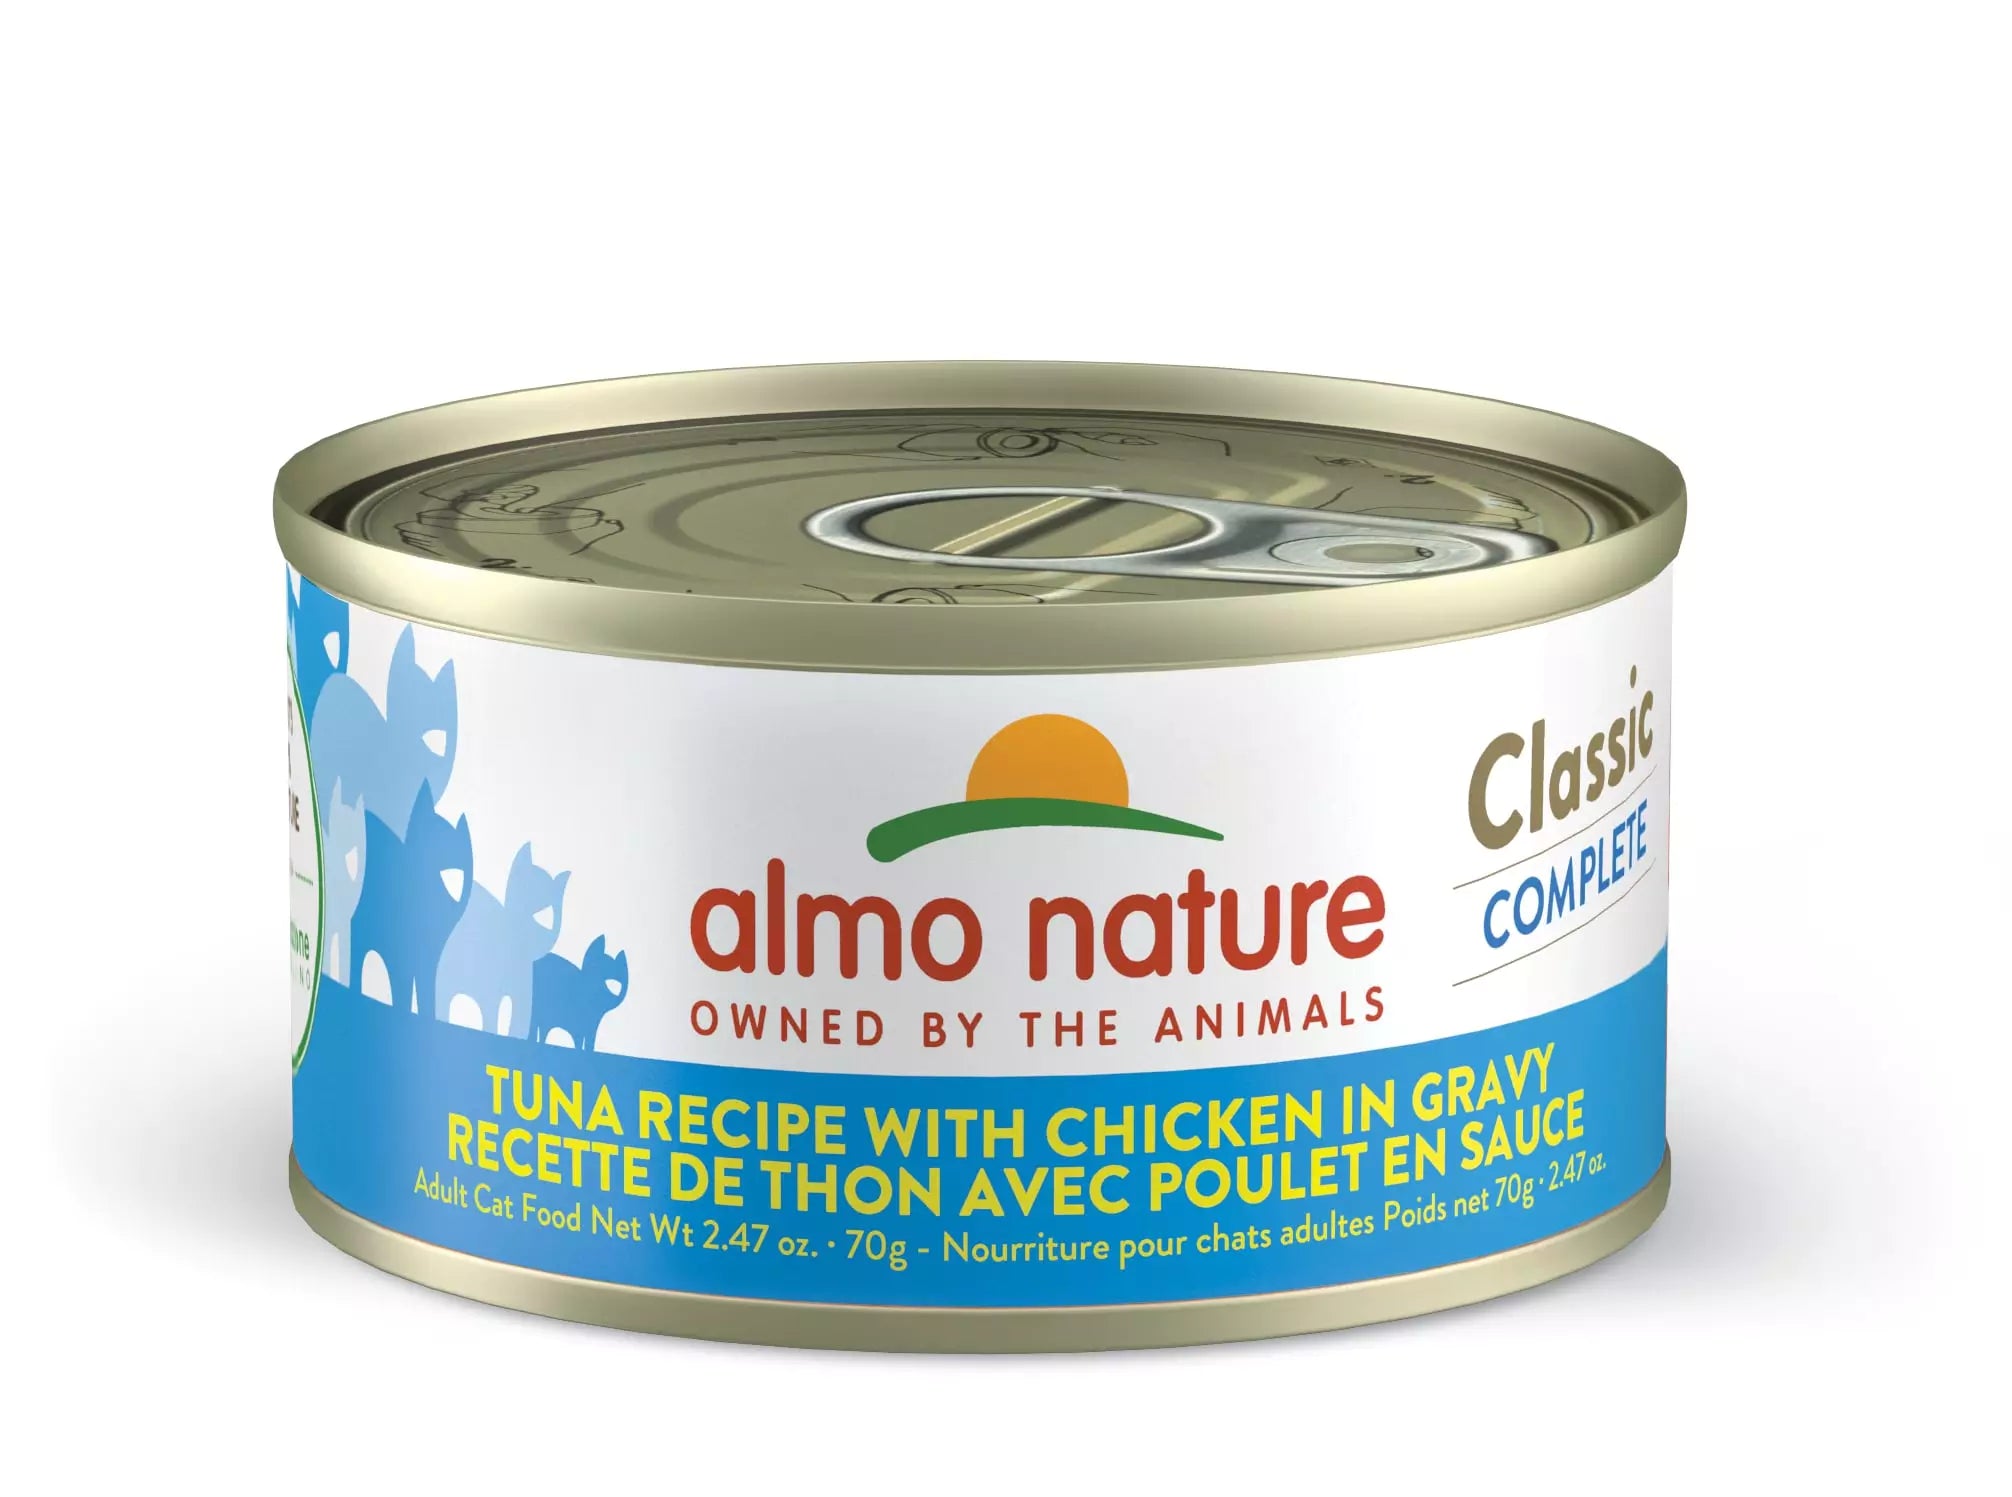 Almo Nature - Classic Complete - Tuna With Chicken In Gravy (Wet Cat Food)